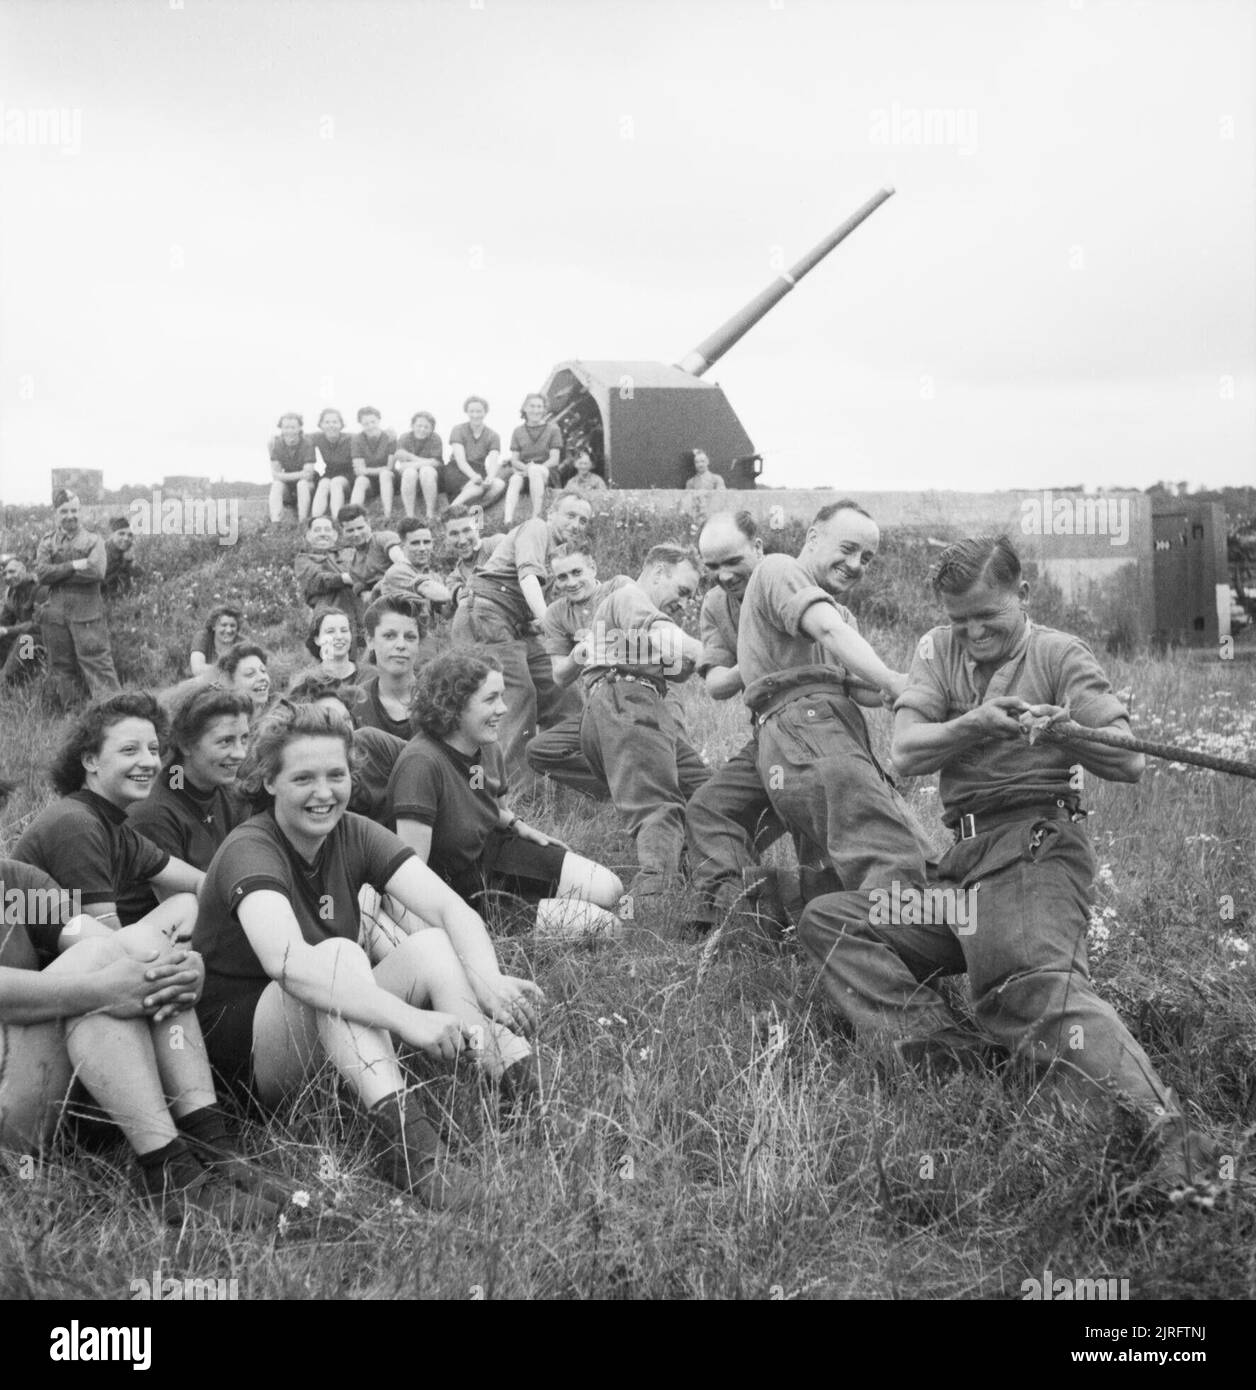 Auxiliary Territorial Service (ATS) girls watch a tug-of-war contest during a sports competition at a mixed 4.5-inch anti-aircraft battery near Edinburgh, 30 July 1943. ATS girls watch a tug-of-war contest during a sports competition at a mixed 4.5-inch anti-aircraft battery near Edinburgh, 30 July 1943. Stock Photo